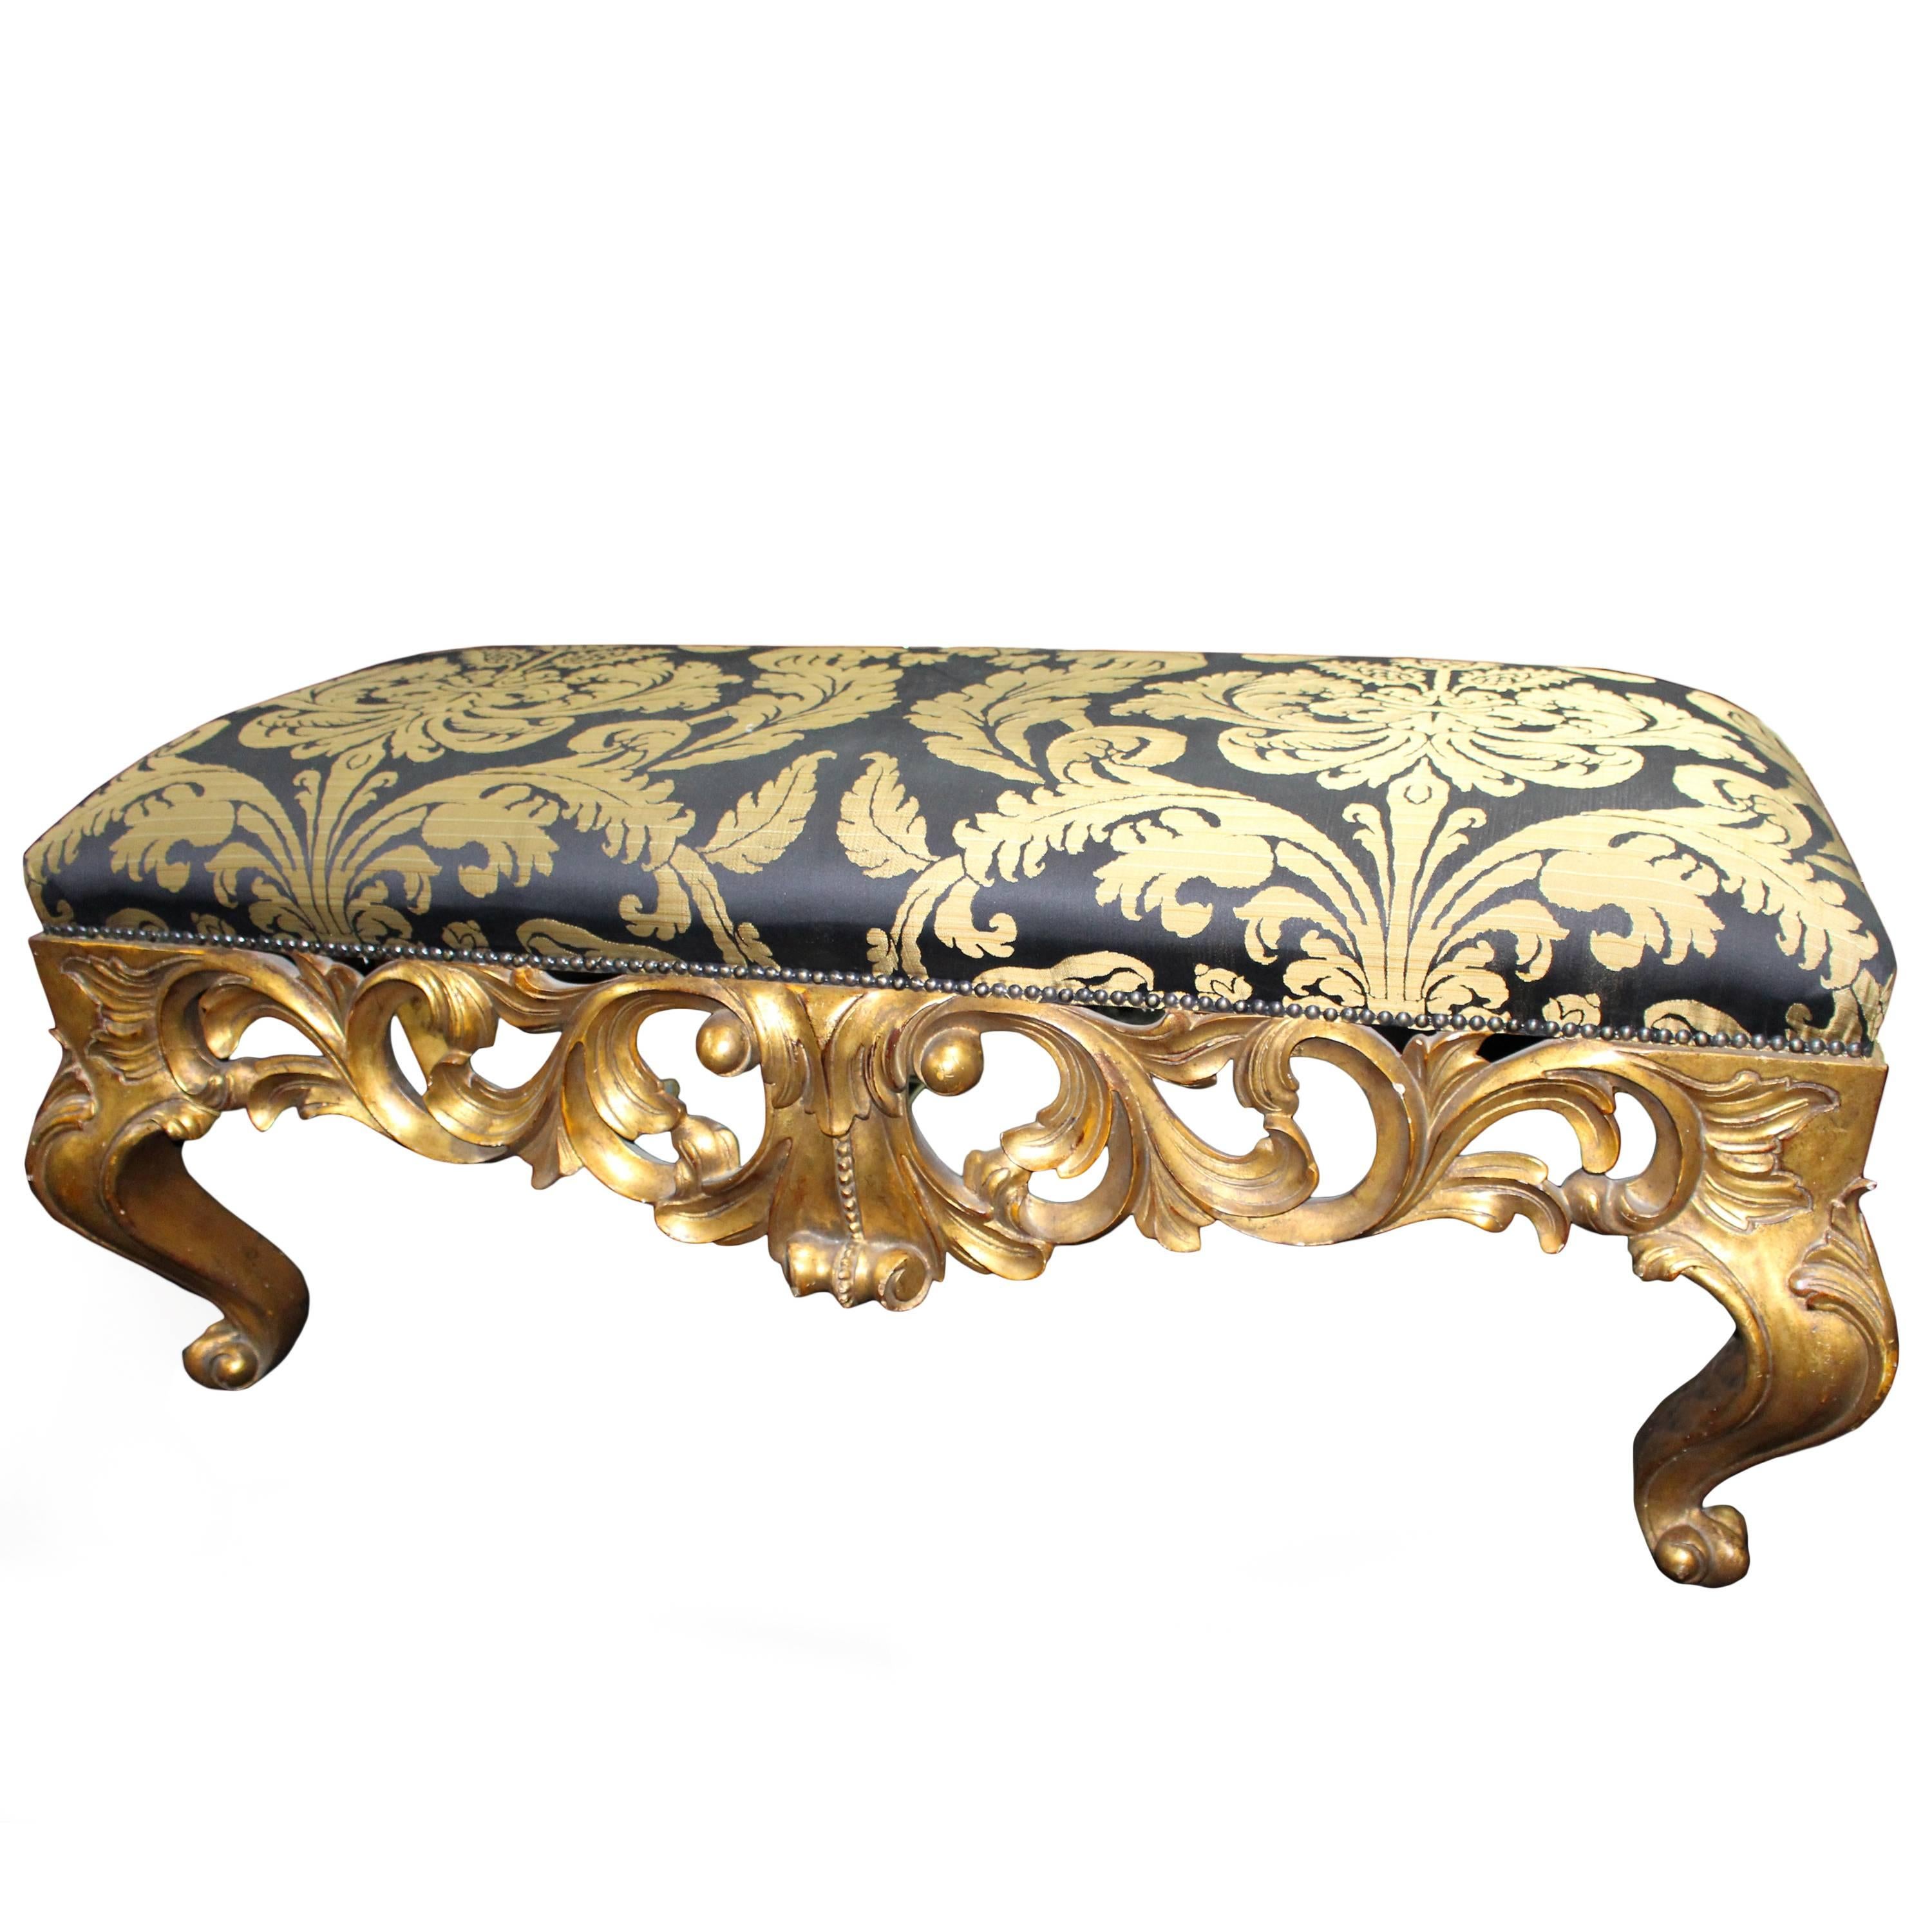 Harrison & Gil Carved Giltwood Upholstered Double Stool